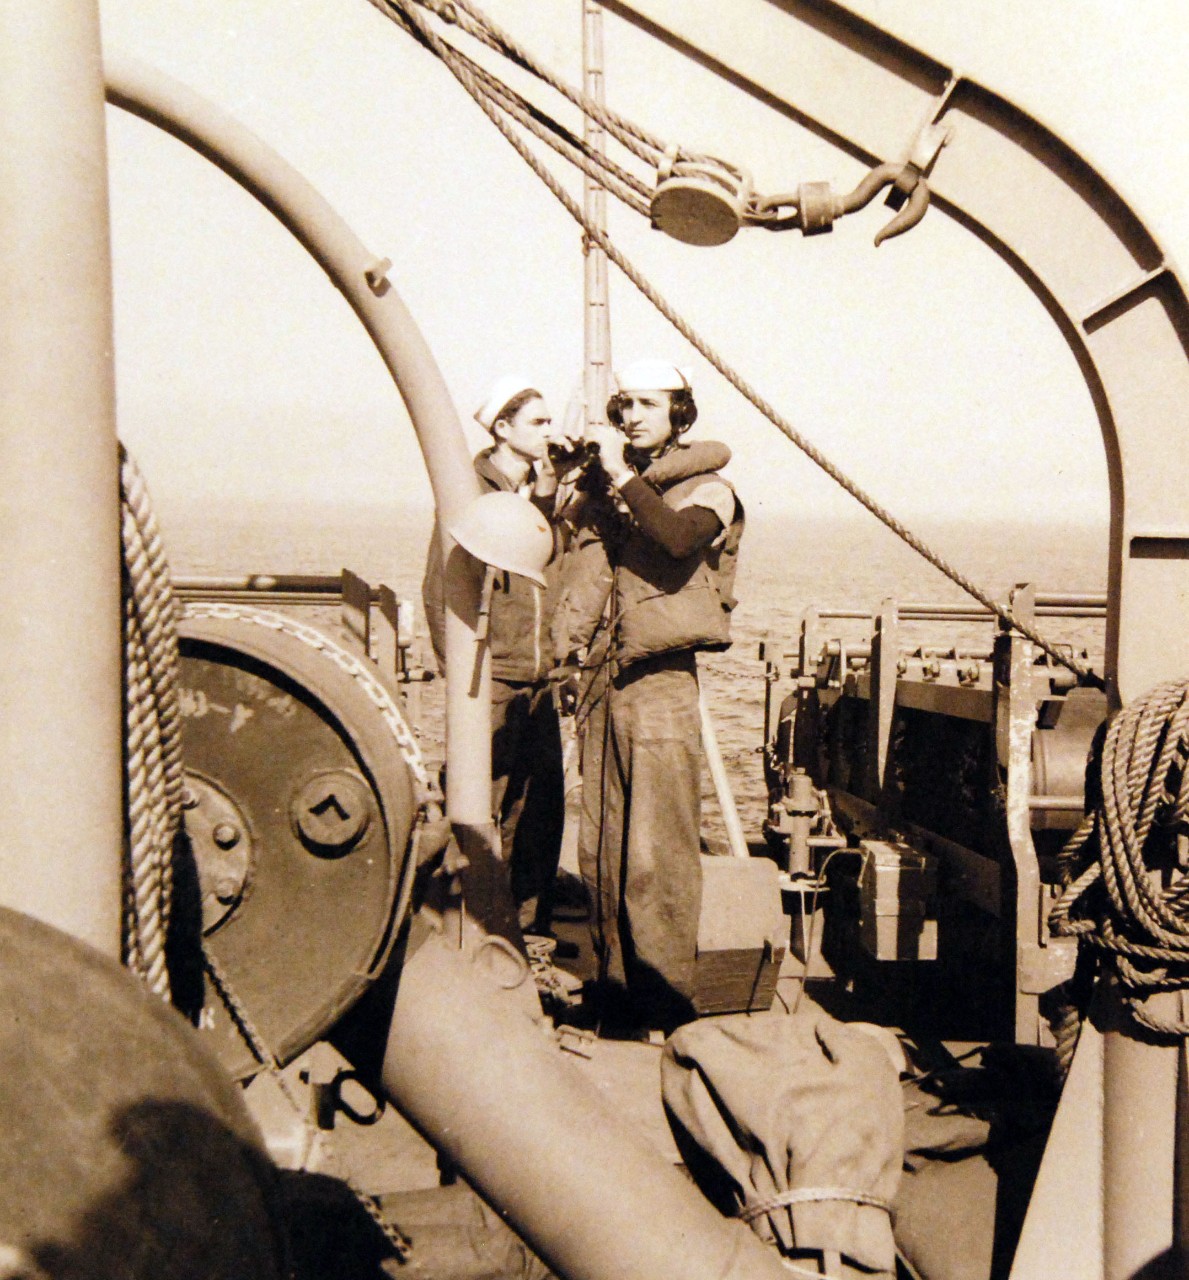 <p>80-G-14939: Battle of the Atlantic: Weapons: K-Gun Navigating USS PC-556. Depth charges onboard. Standing between the two depth charge racks on the fantail, men await orders from the bridge to adjust depth charges to explode at a given depth. One of these men will also dump the “ash cans” when given orders. In center foreground is part of a K-Gun, used to propel “ash cans” to either side of the ship, October 8, 1942.&nbsp;</p>
